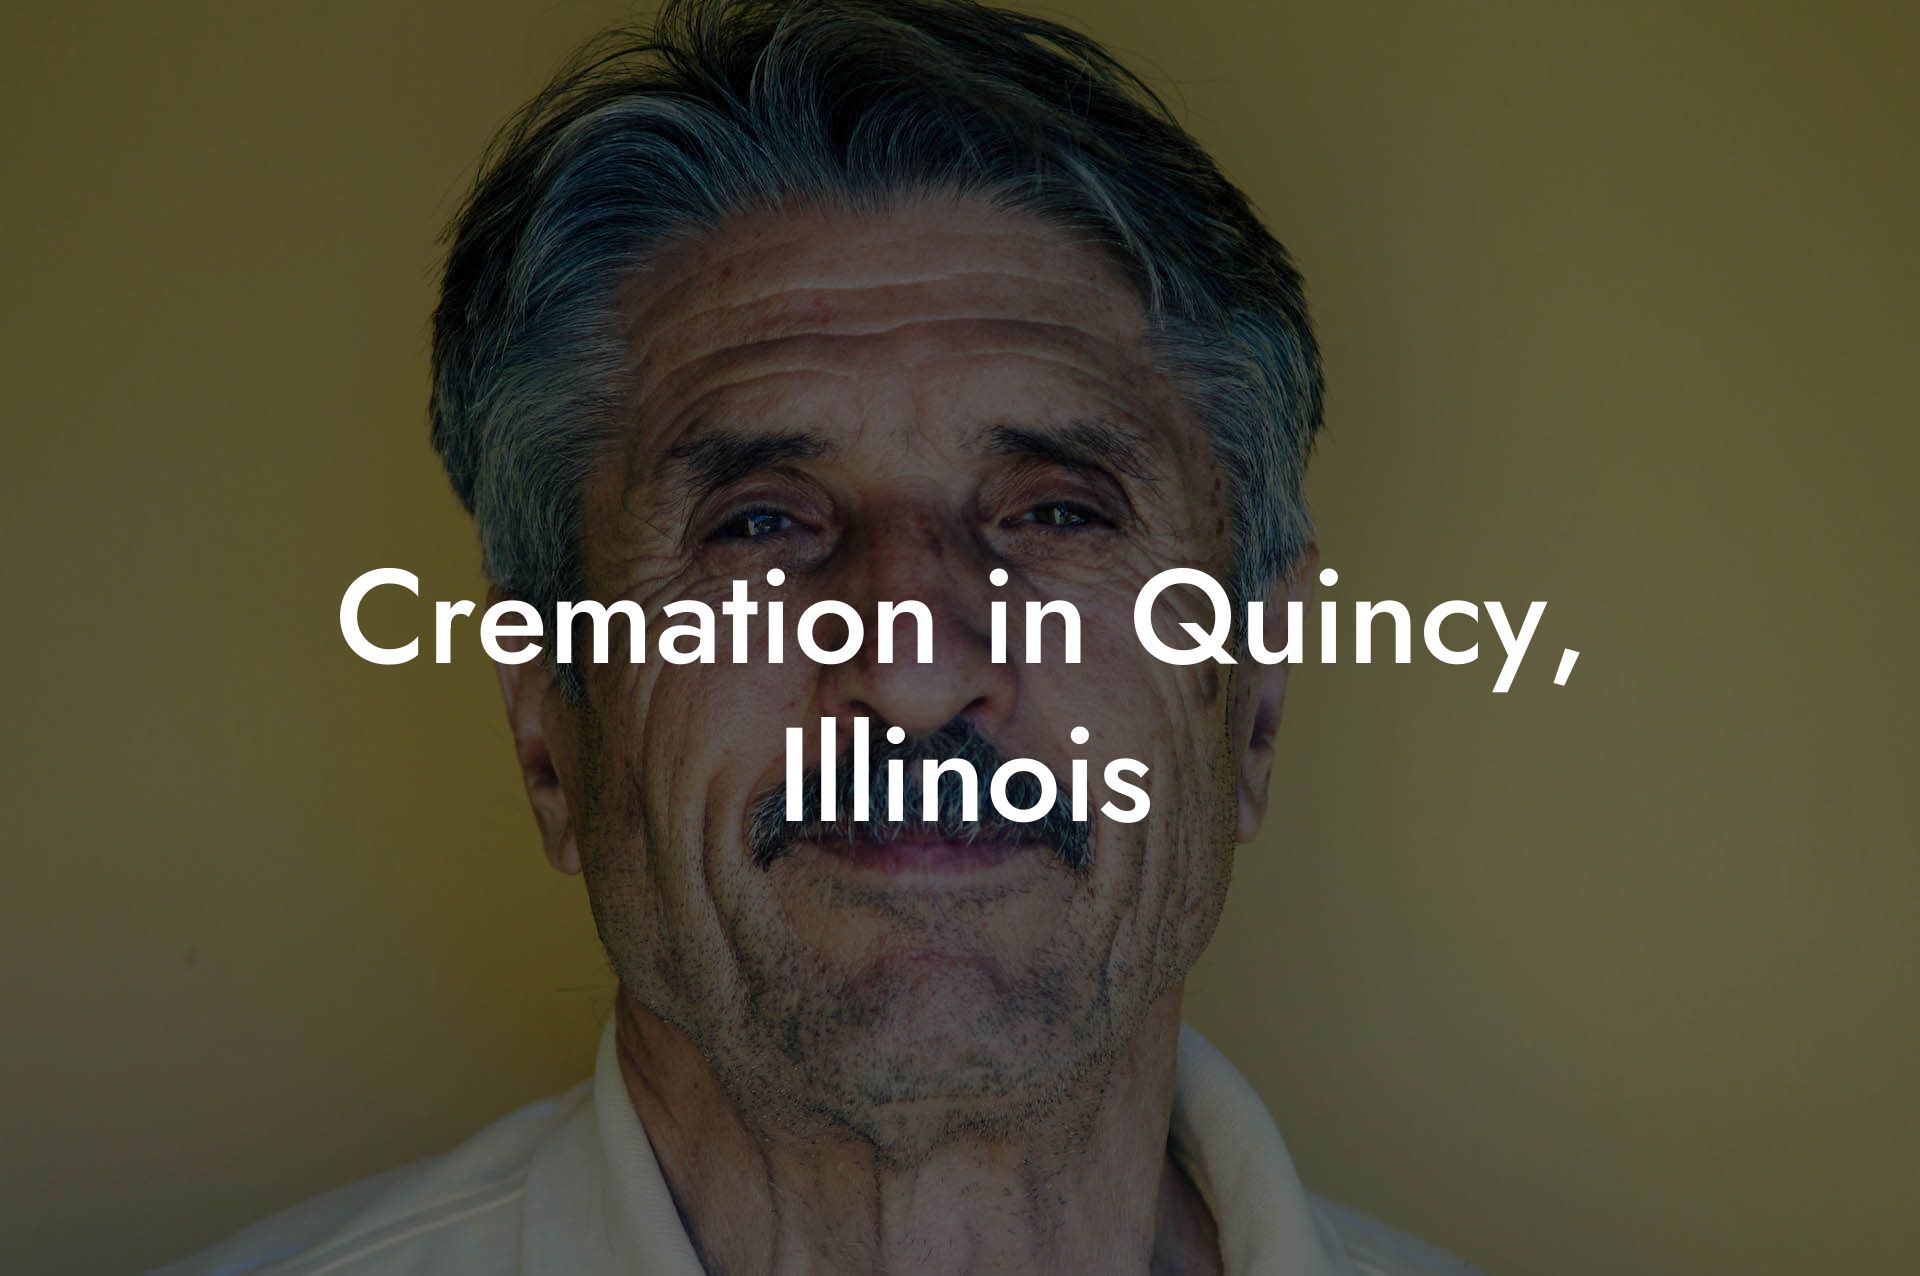 Cremation in Quincy, Illinois